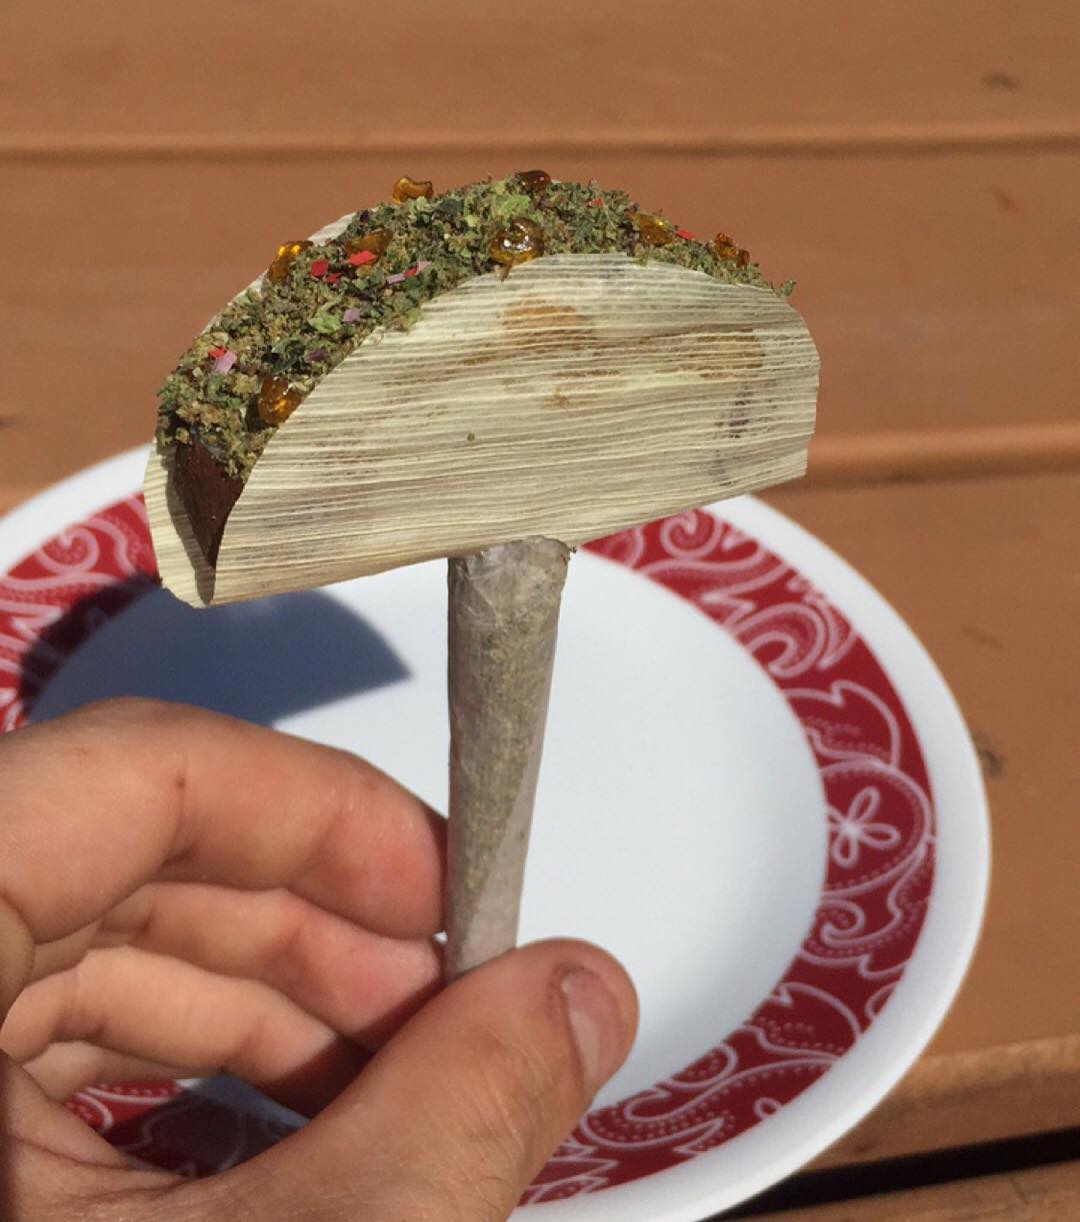 Amazing Smokable Art Made Out of Marijuana And Rolling Papers